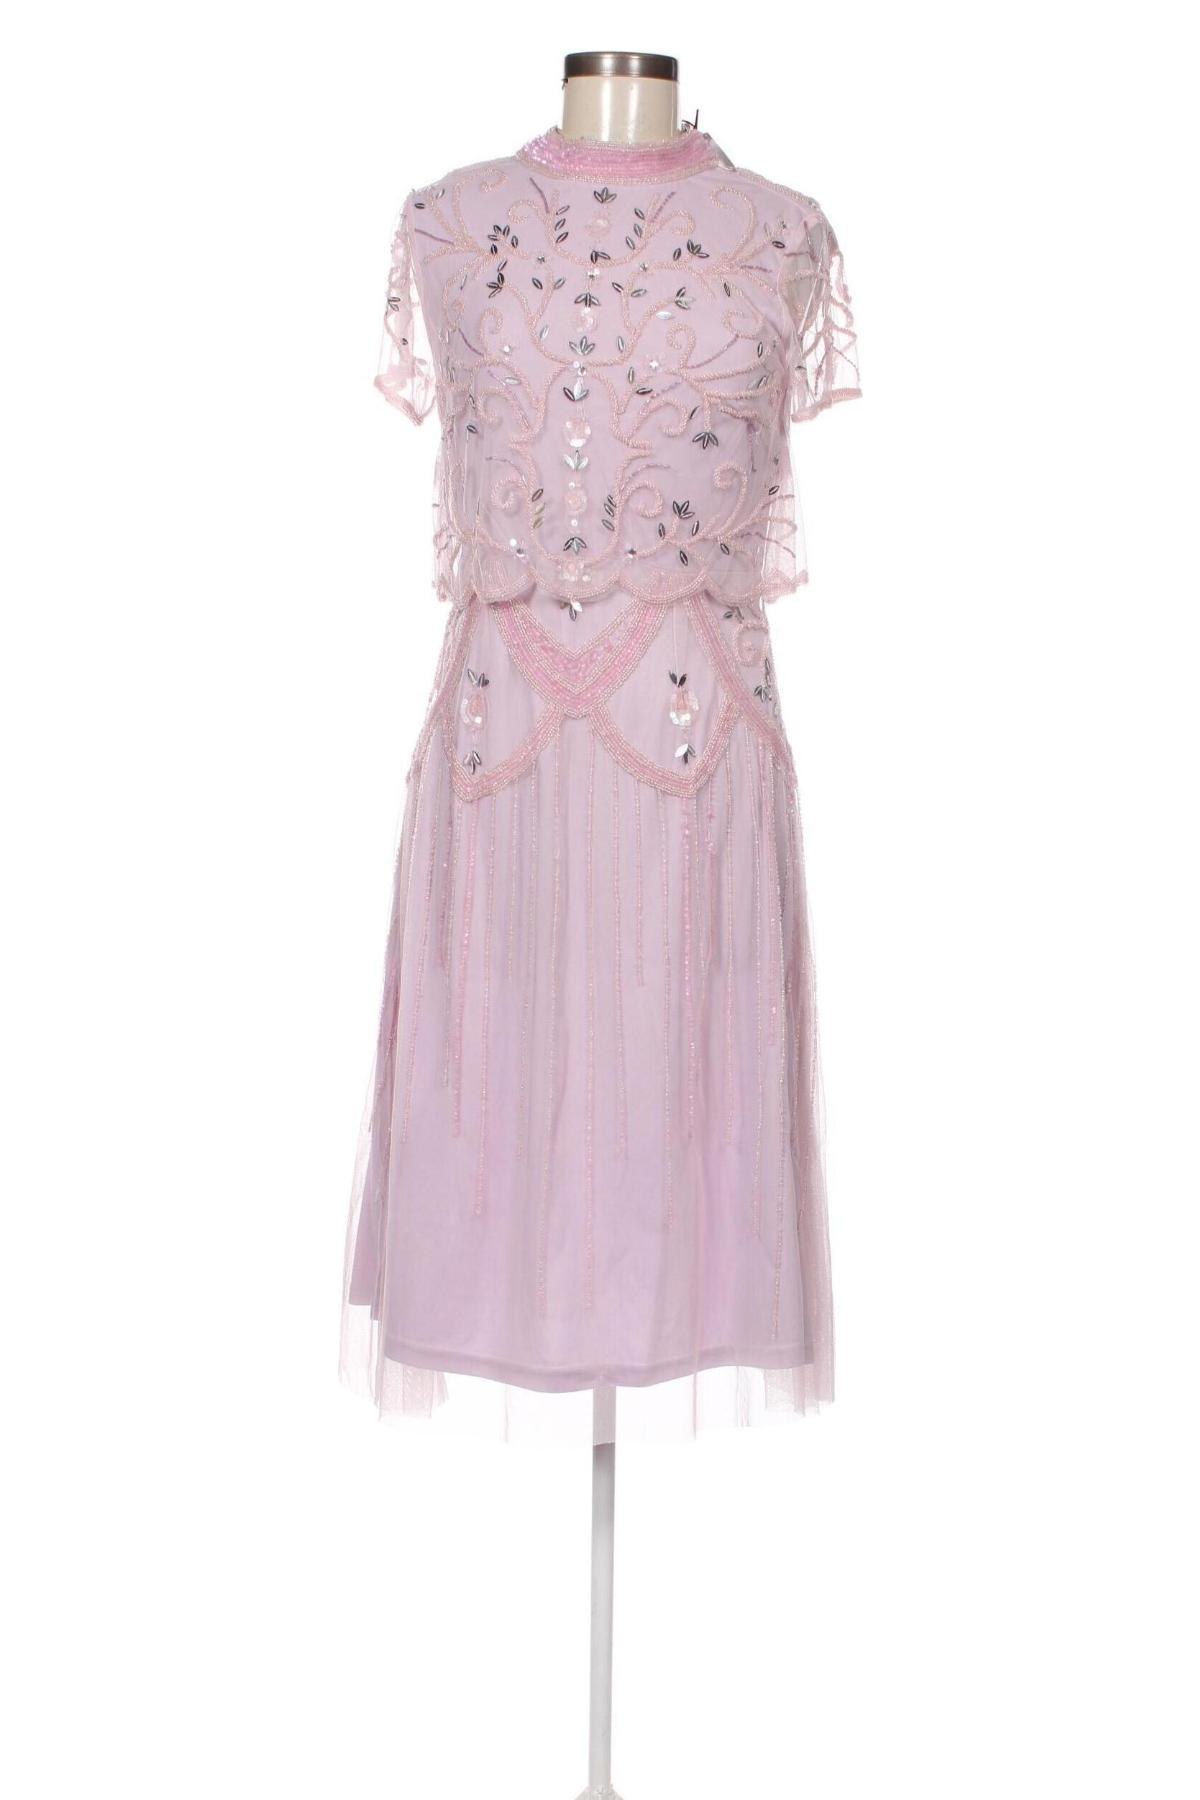 Kleid Frock And Frill, Größe M, Farbe Rosa, Preis 17,65 €